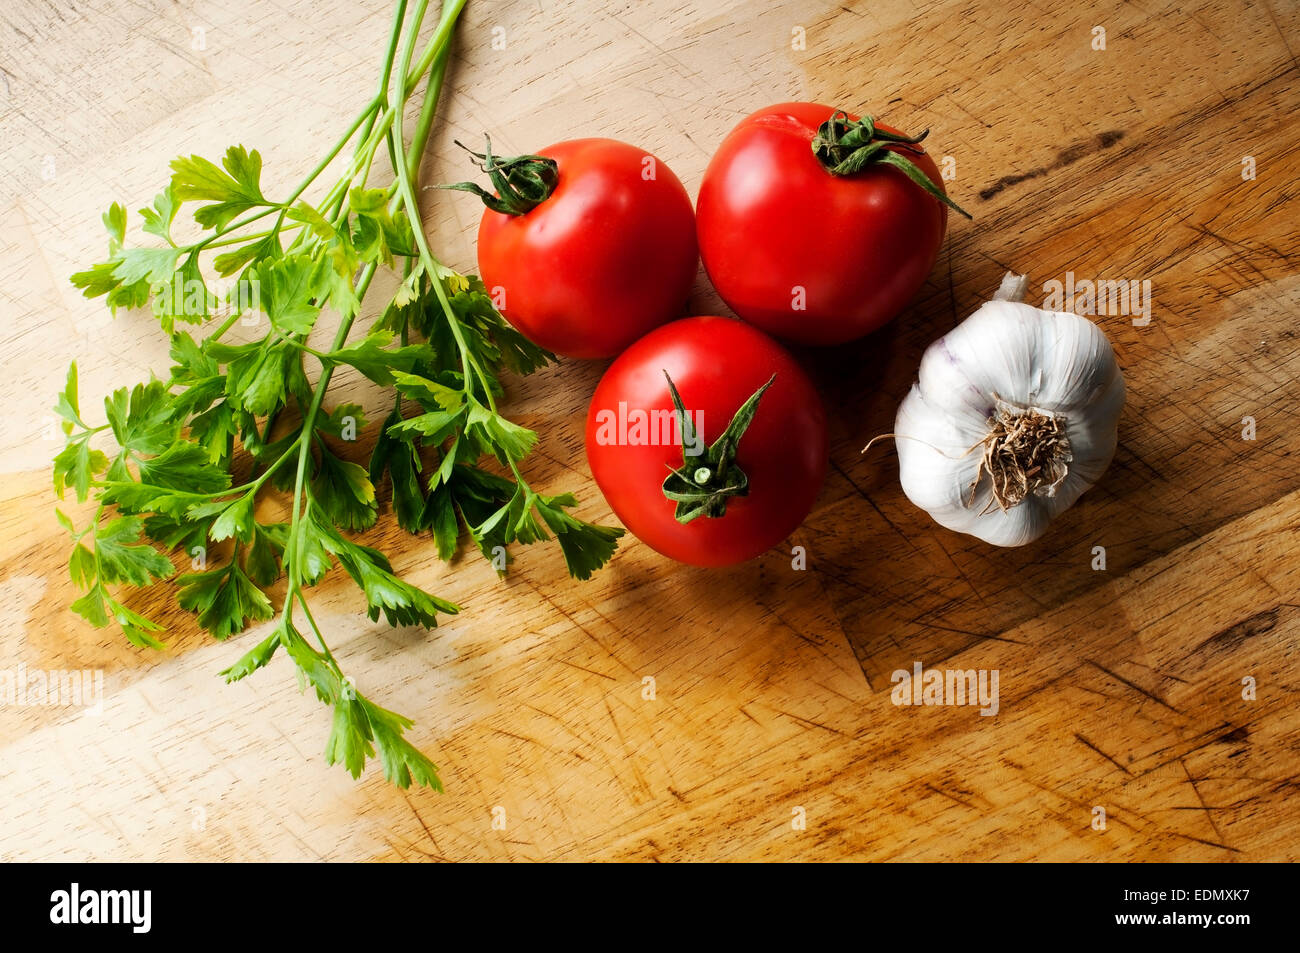 typical vegetables for seasoning in Mediterranean cuisine in the same colors of the Italian flag Stock Photo